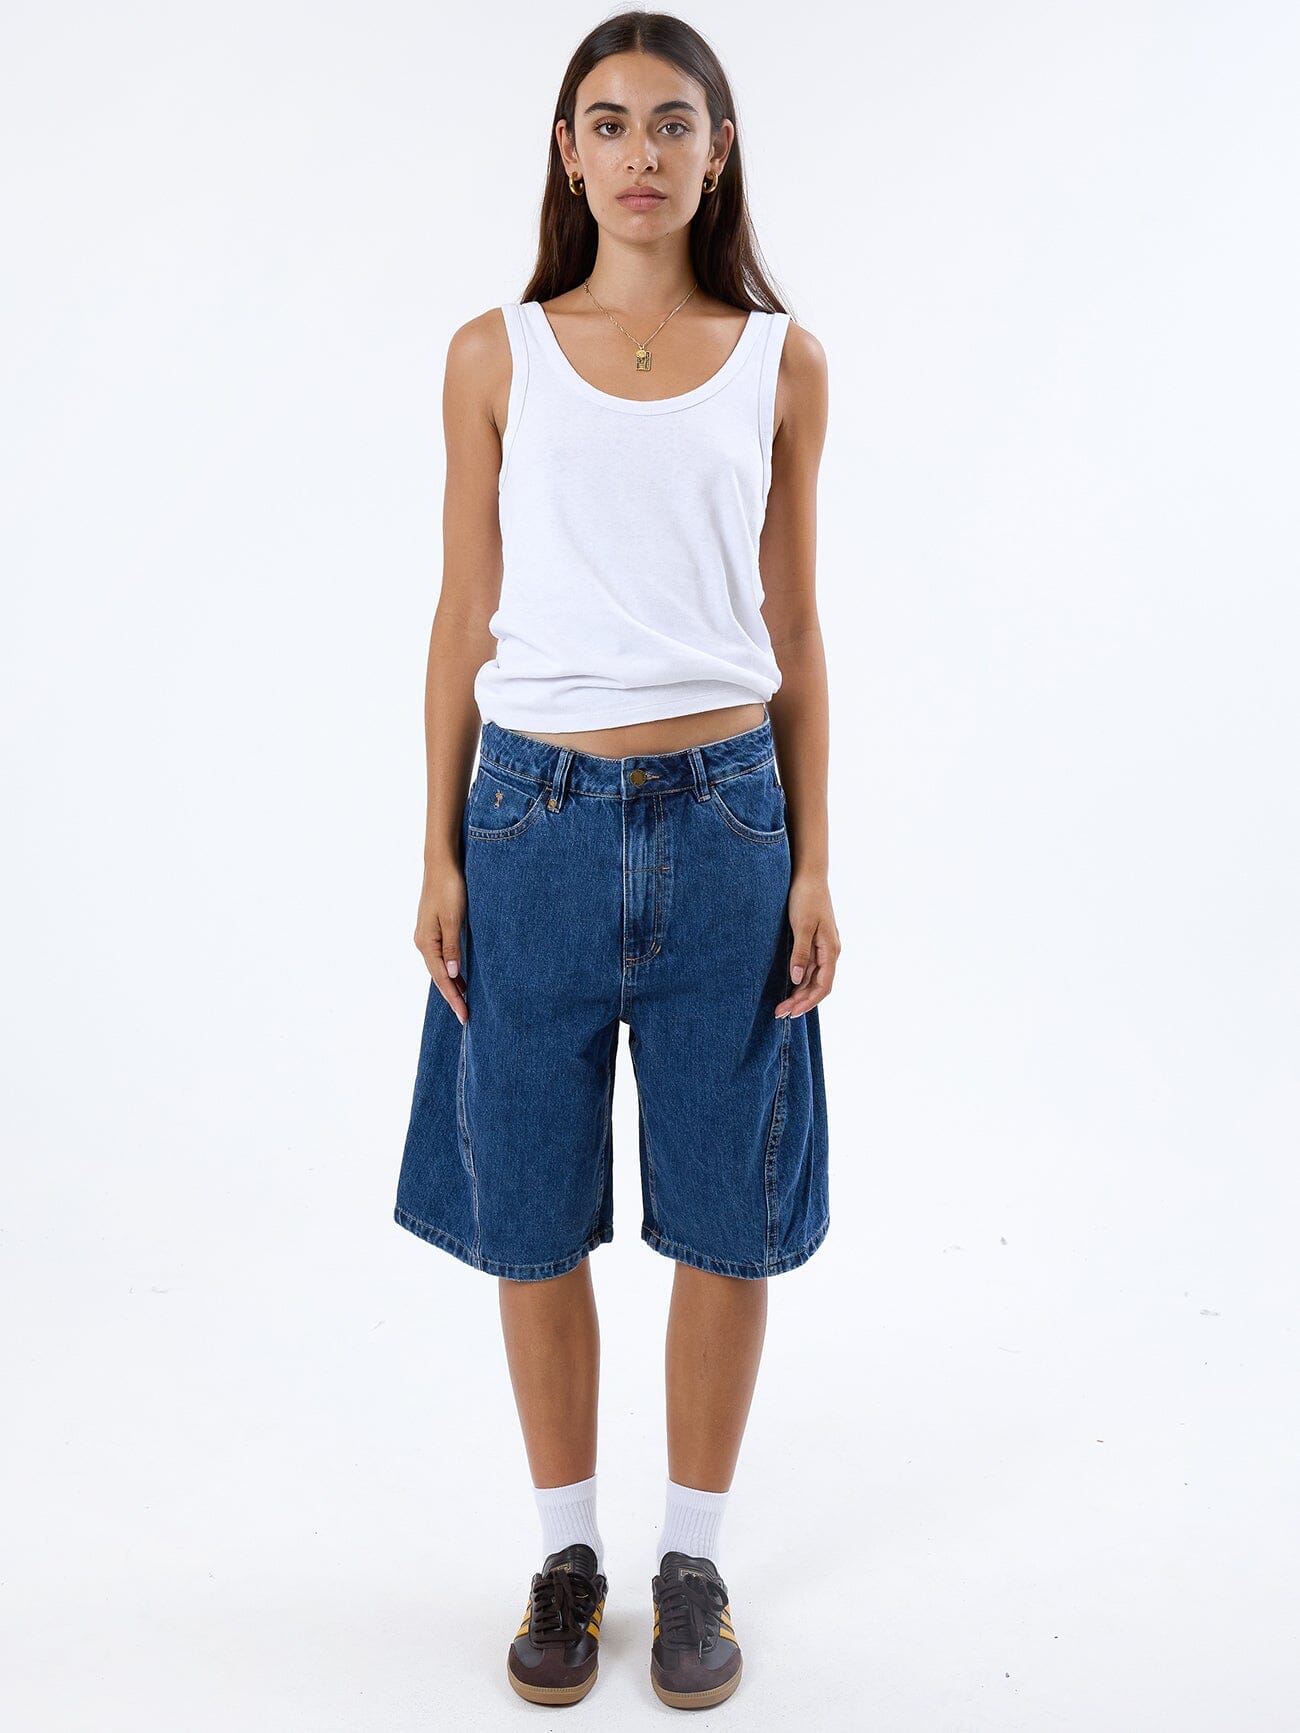 Women's Shorts and Skirts